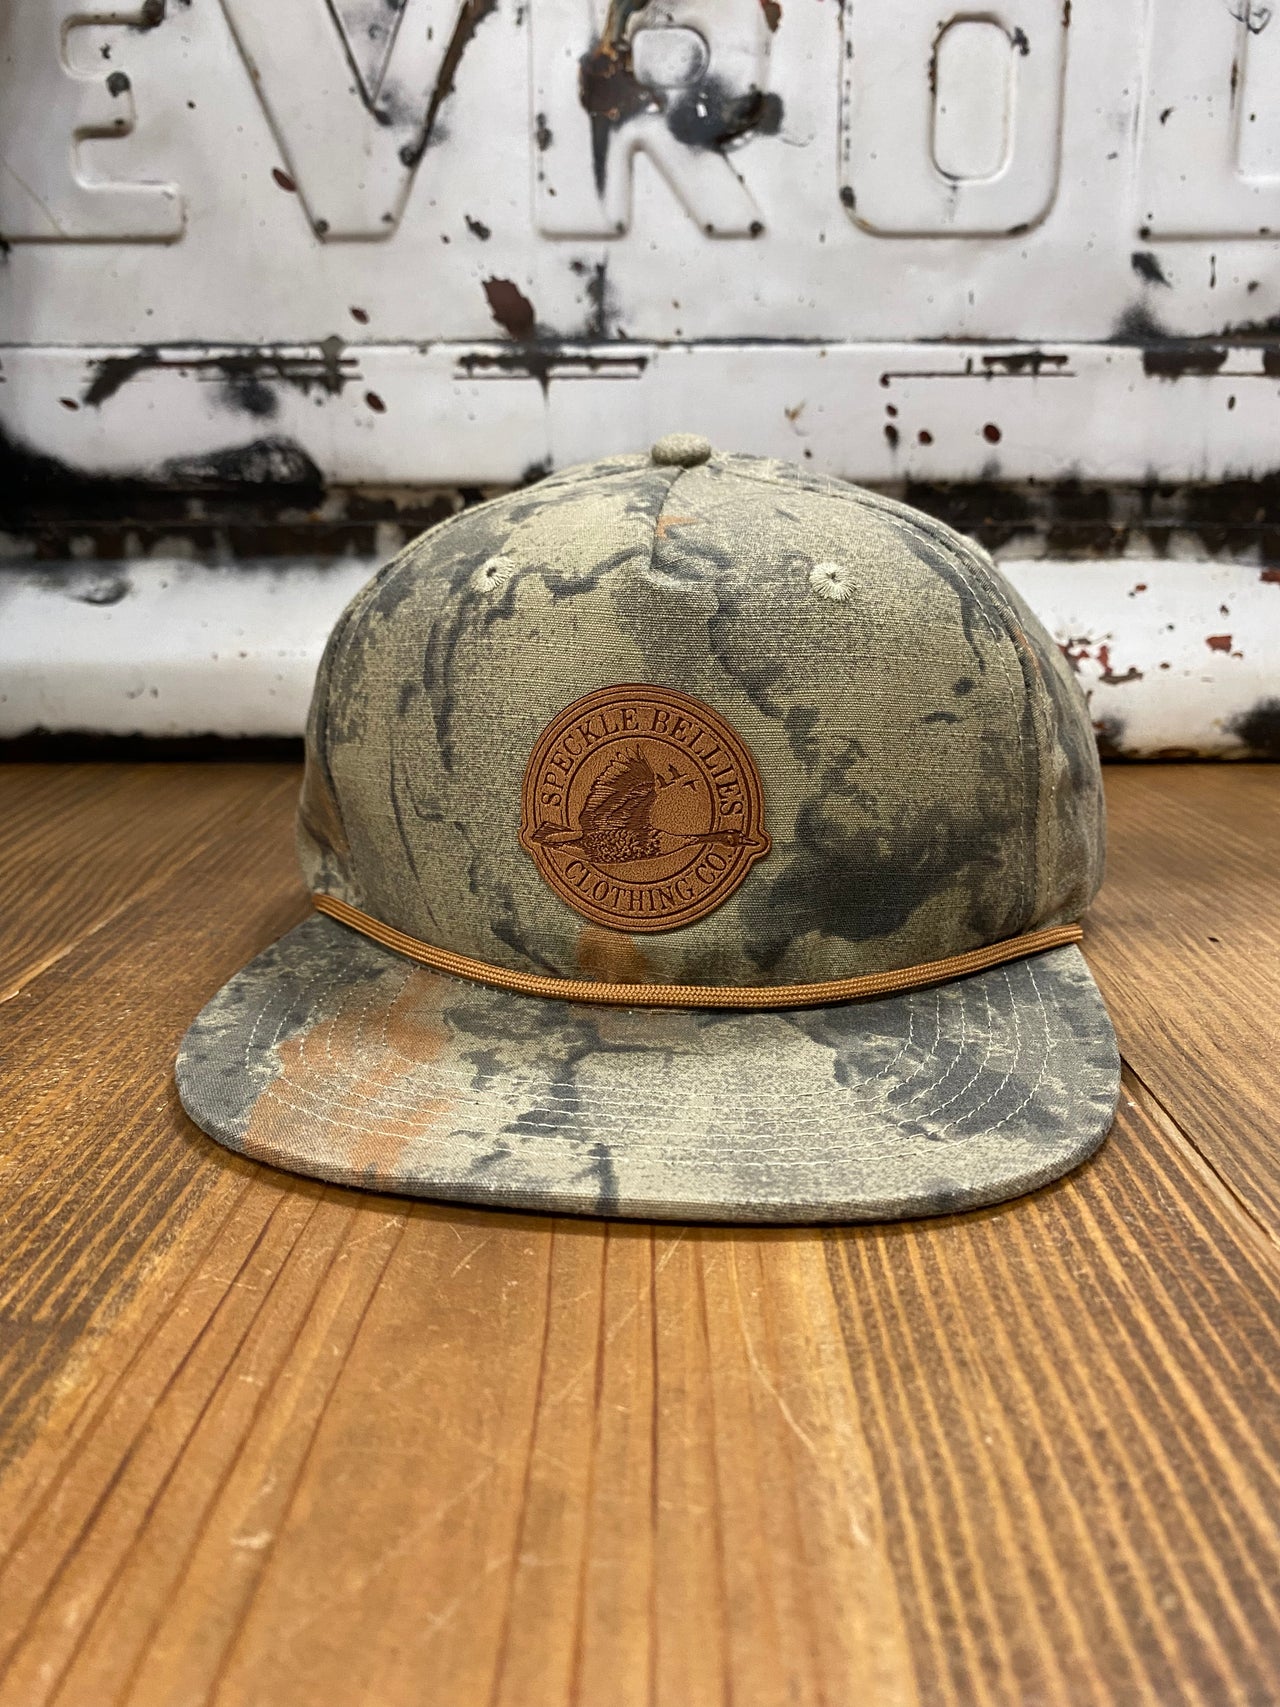 "Speckle Bellies Circle Logo Leather Patch Natural Camo Rope Cap - High-quality mesh and 100% polyester construction for comfort and durability. Features a distinctive leather patch with a circle logo, complemented by a natural camo pattern. Mid crown design, adjustable fit, and rugged rope detailing for an adventurous, outdoor-inspired look."